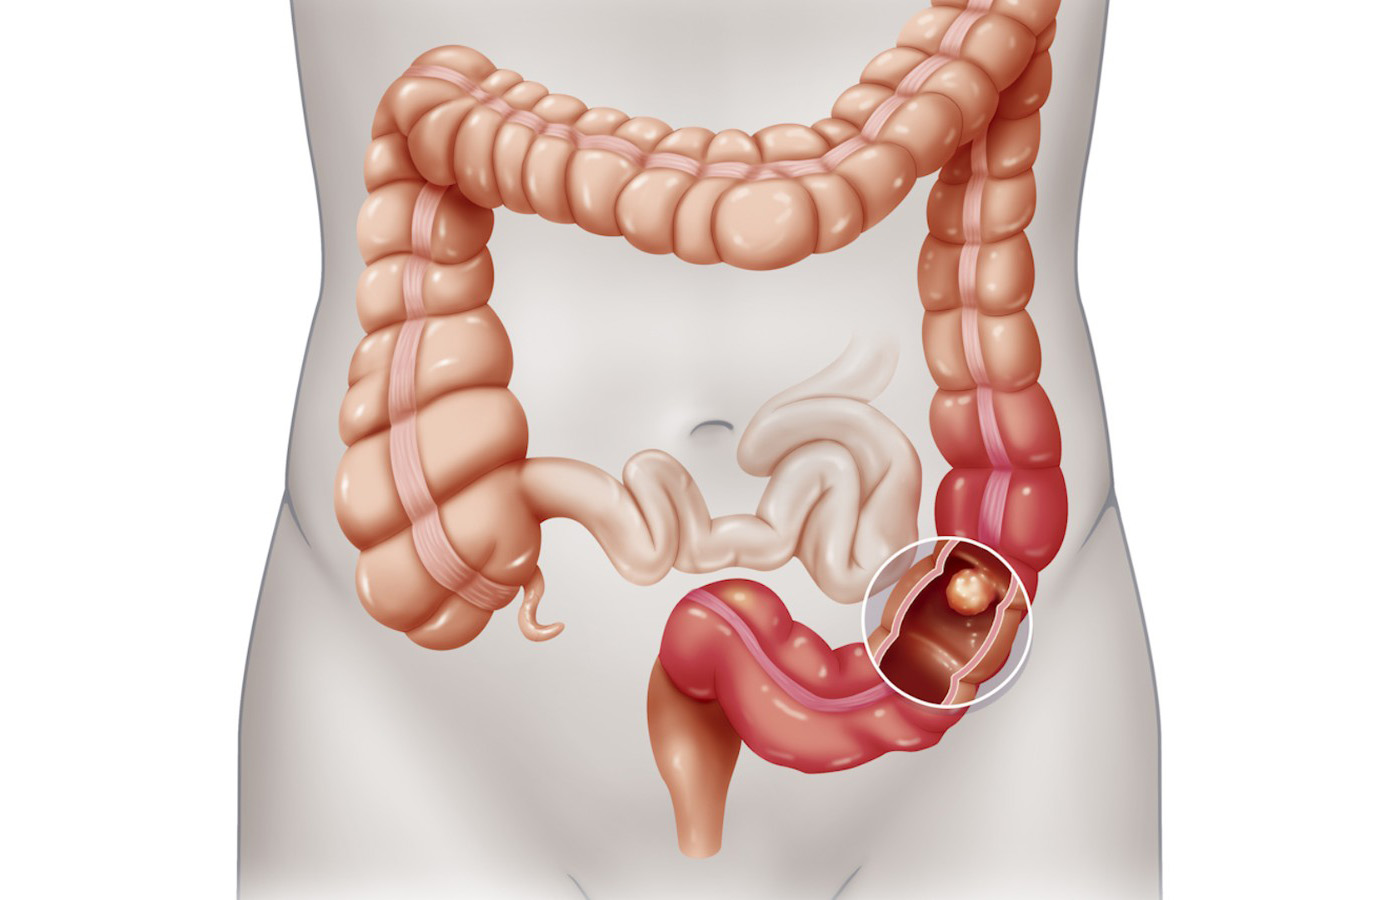 Colon Cancer; Early Detection and Lifestyle